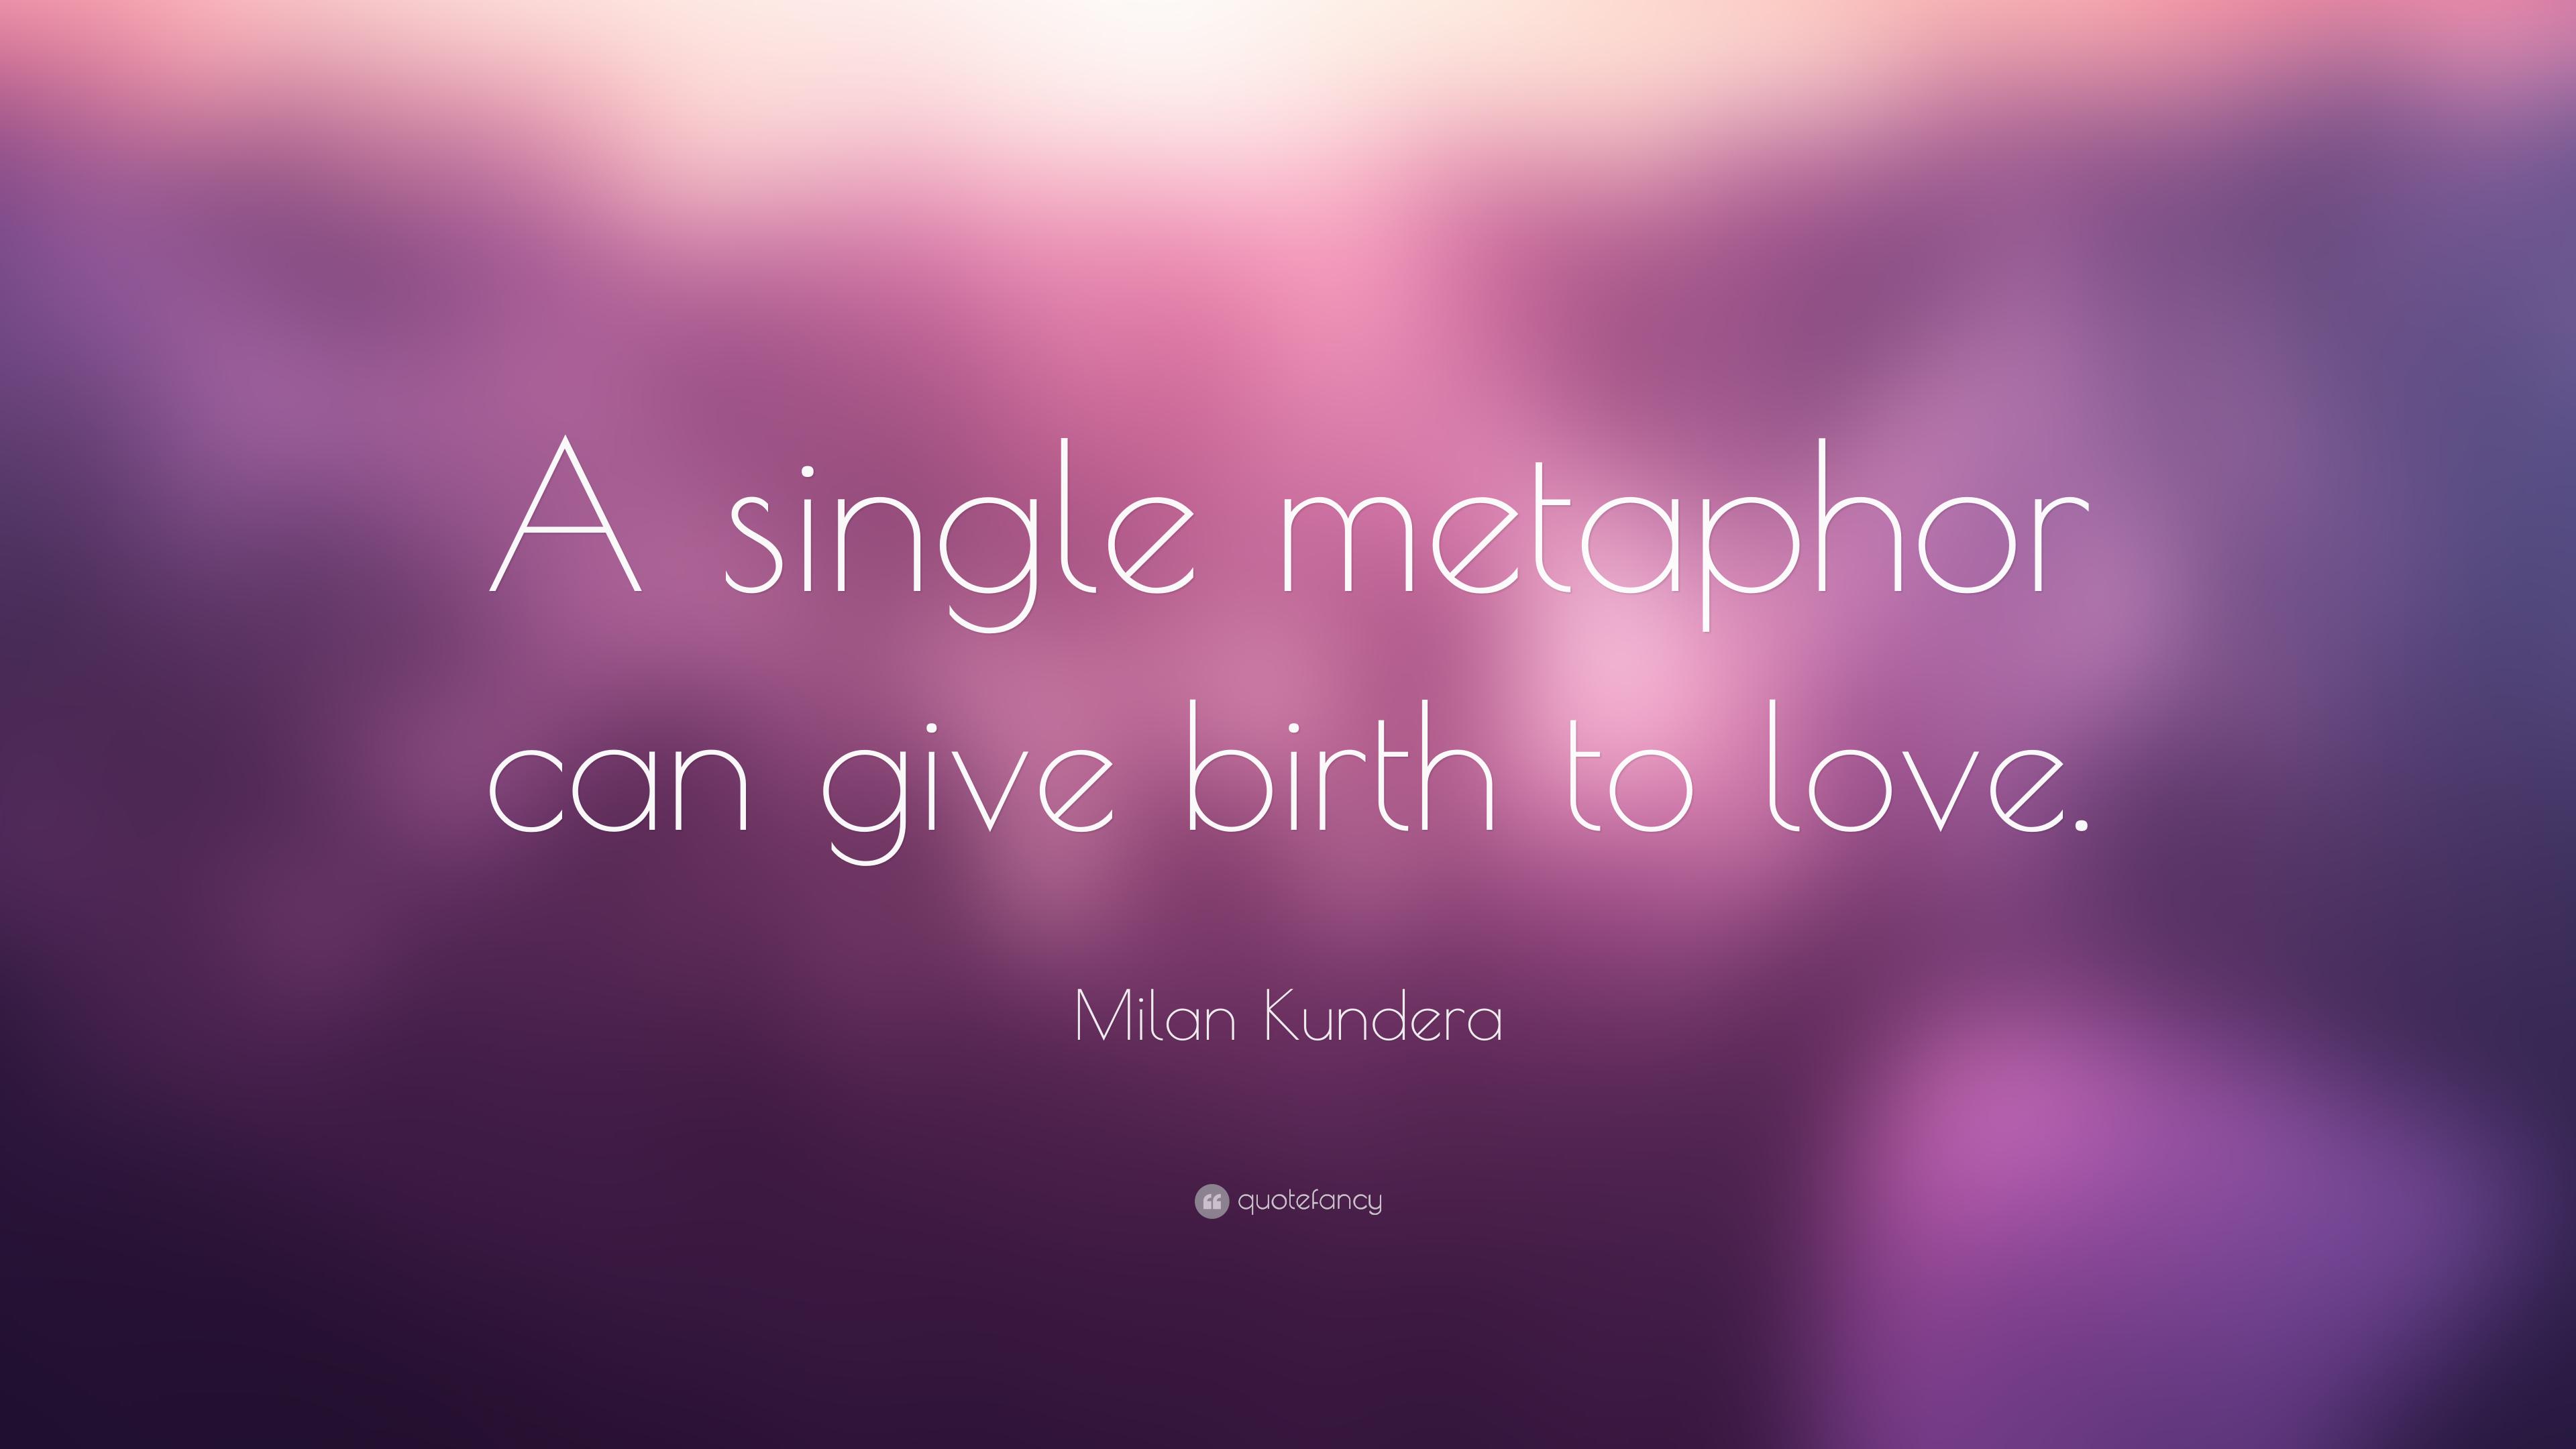 Milan Kundera Quote: “A single metaphor can give birth to love.” 7